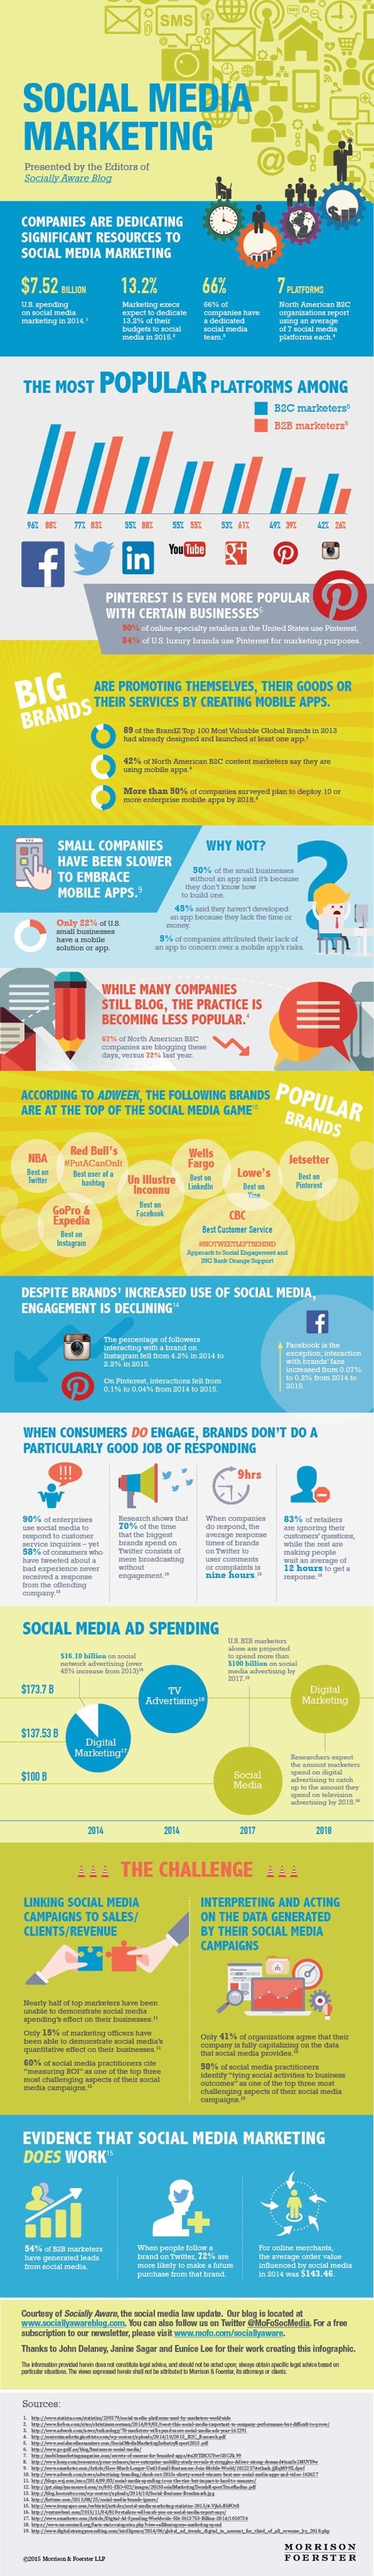 Infographie 268 - social-media-marketing-infographic